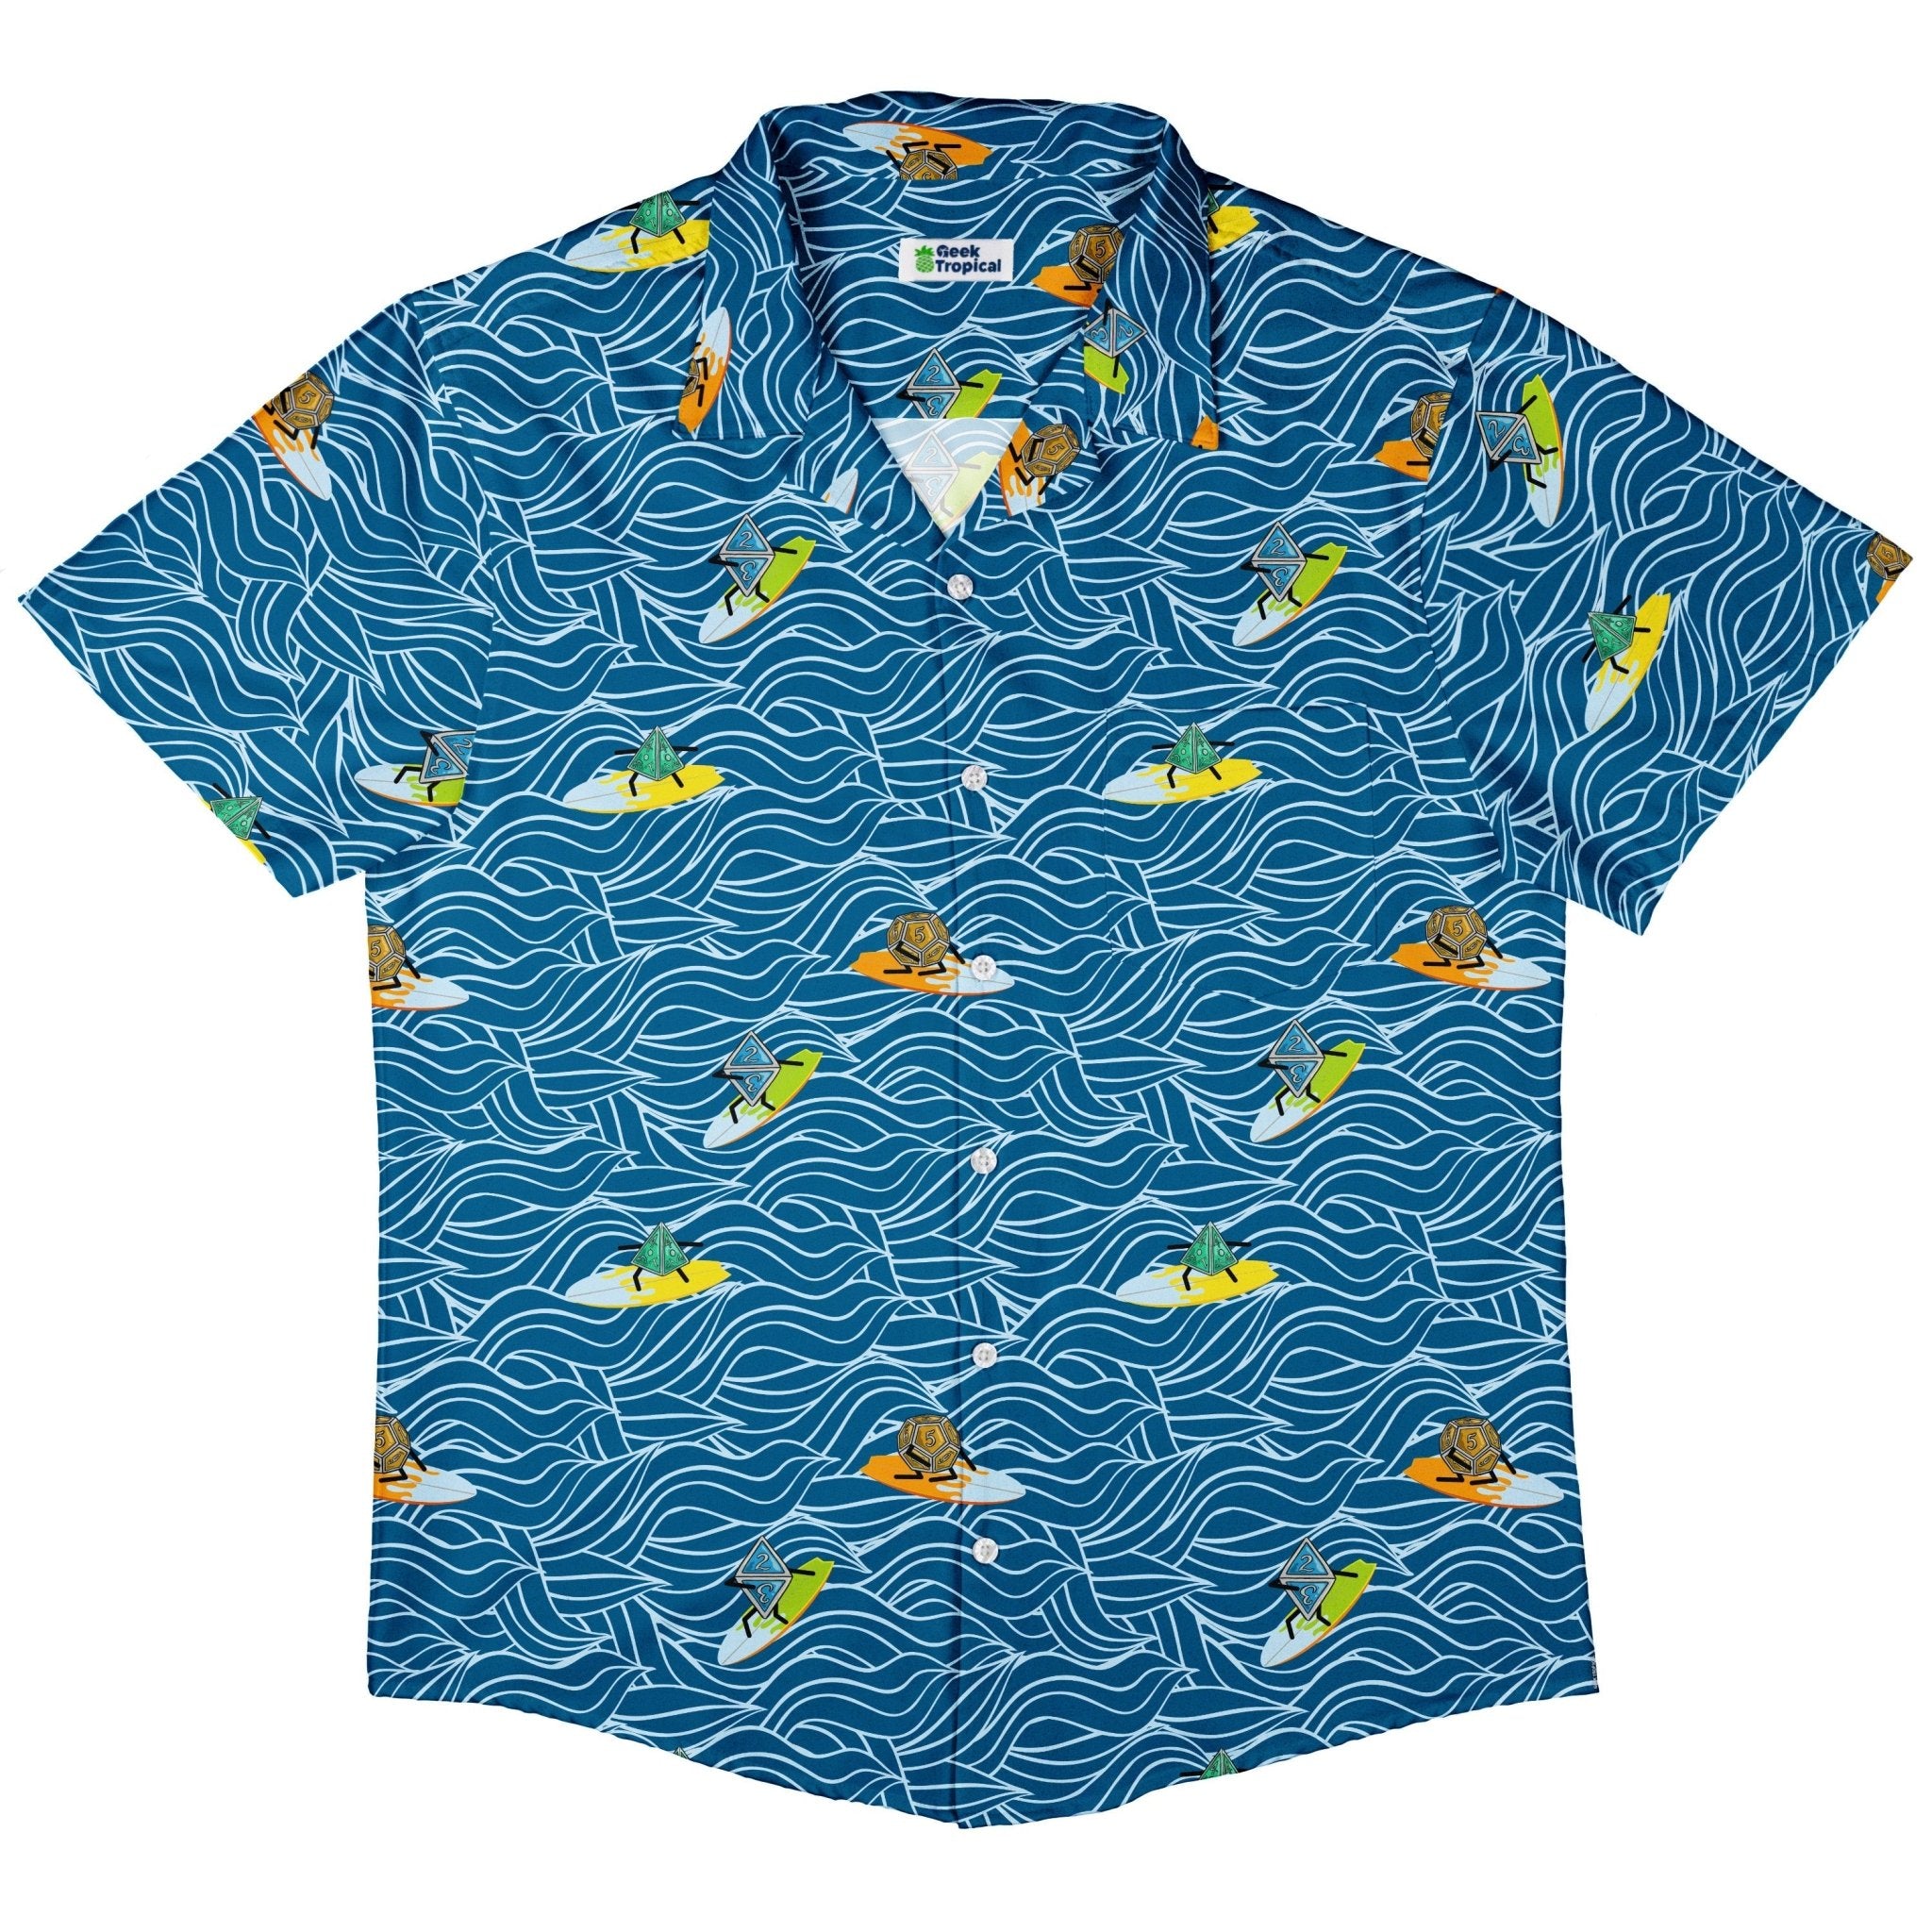 Surf and Roll Dnd Dice Button Up Shirt - adult sizing - Design by Dunking Toast - dnd & rpg print